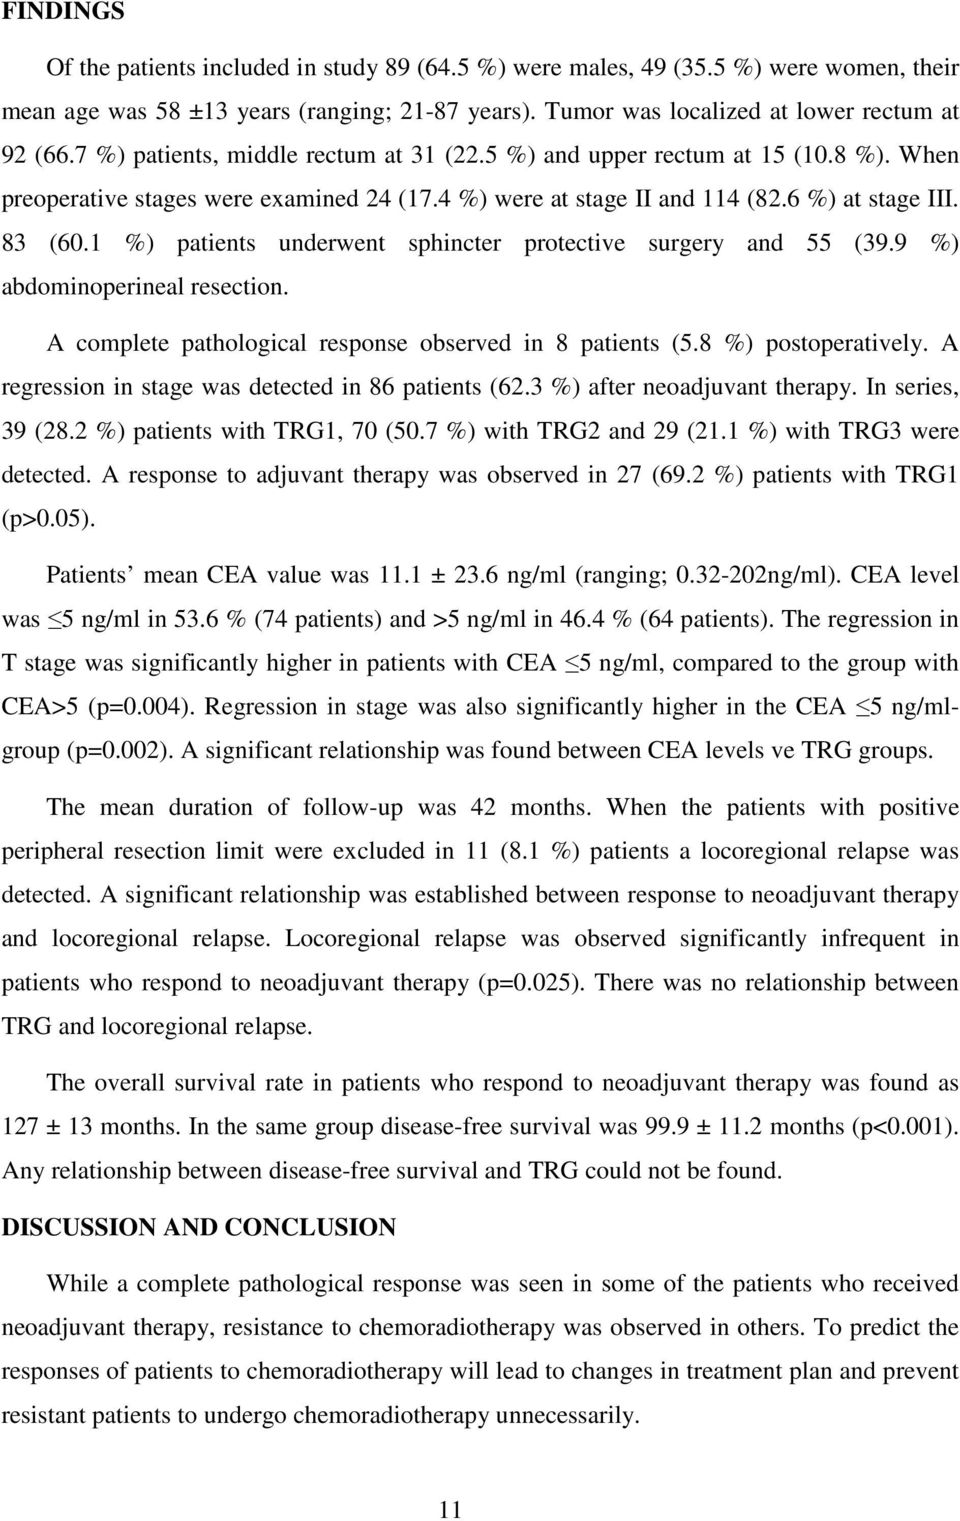 1 %) patients underwent sphincter protective surgery and 55 (39.9 %) abdominoperineal resection. A complete pathological response observed in 8 patients (5.8 %) postoperatively.